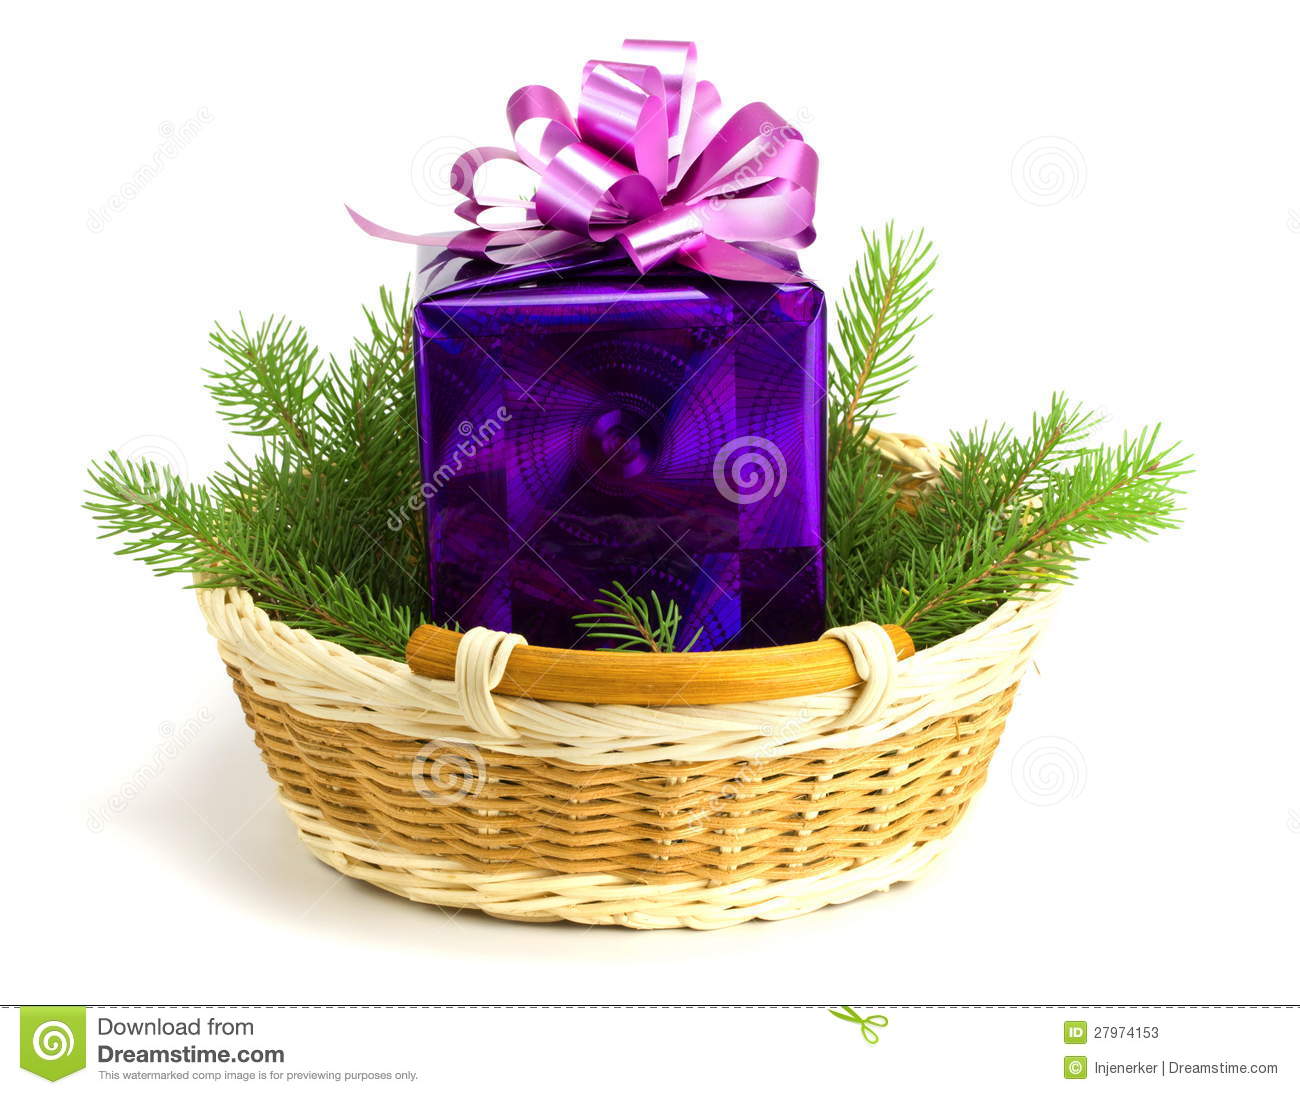 Gift With A Fur Tree In A Basket On The White Isolated Background